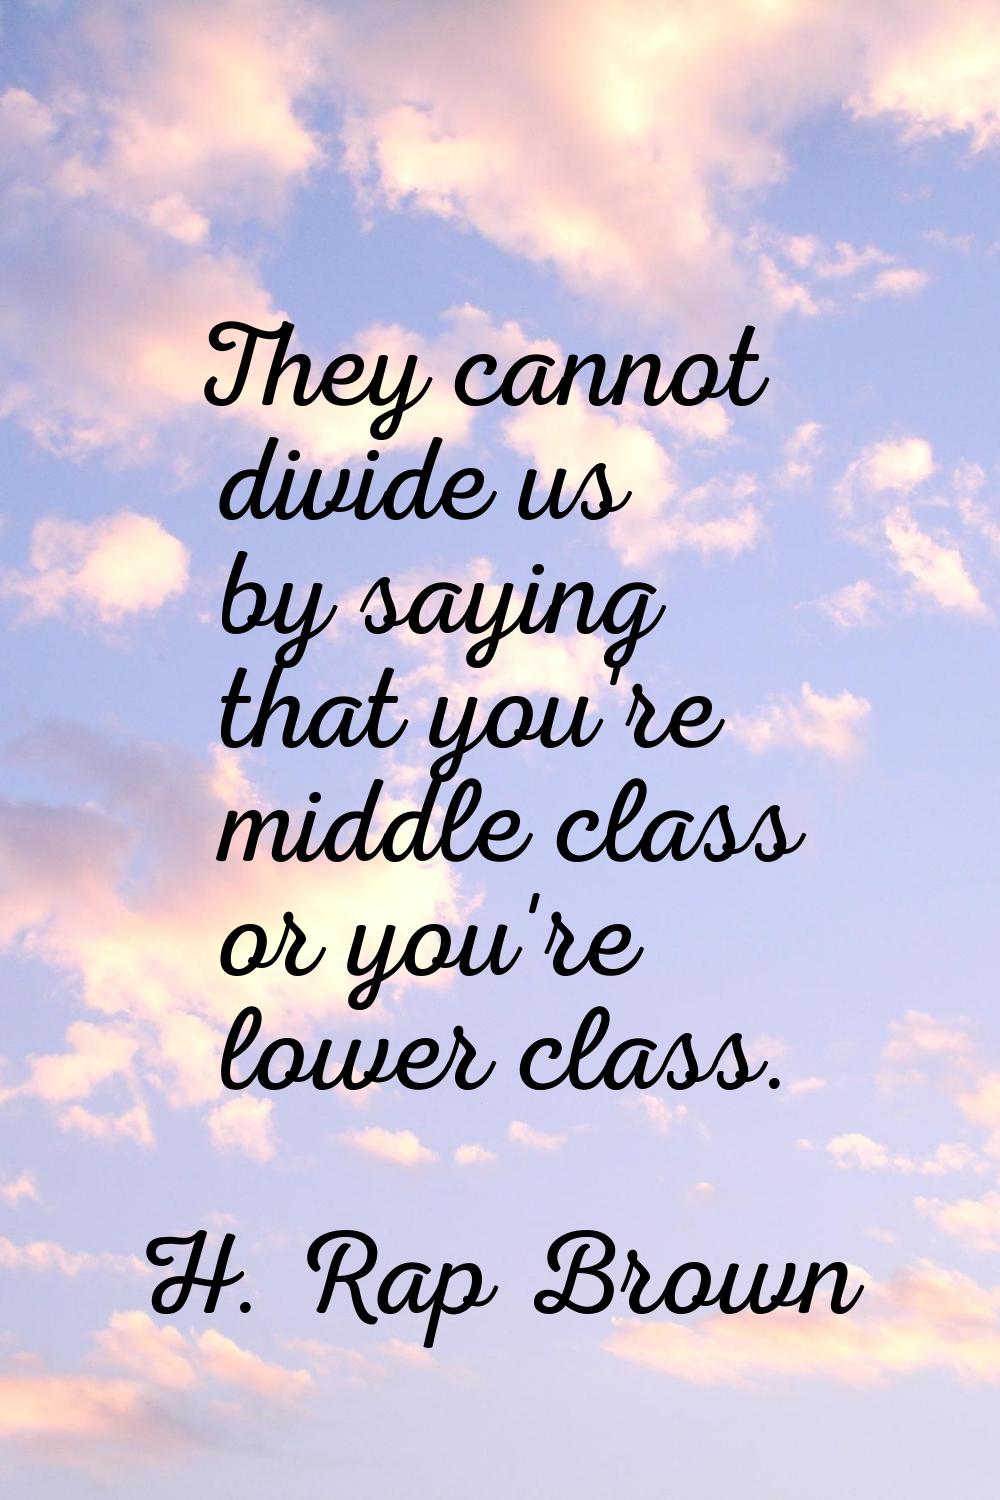 They cannot divide us by saying that you're middle class or you're lower class.